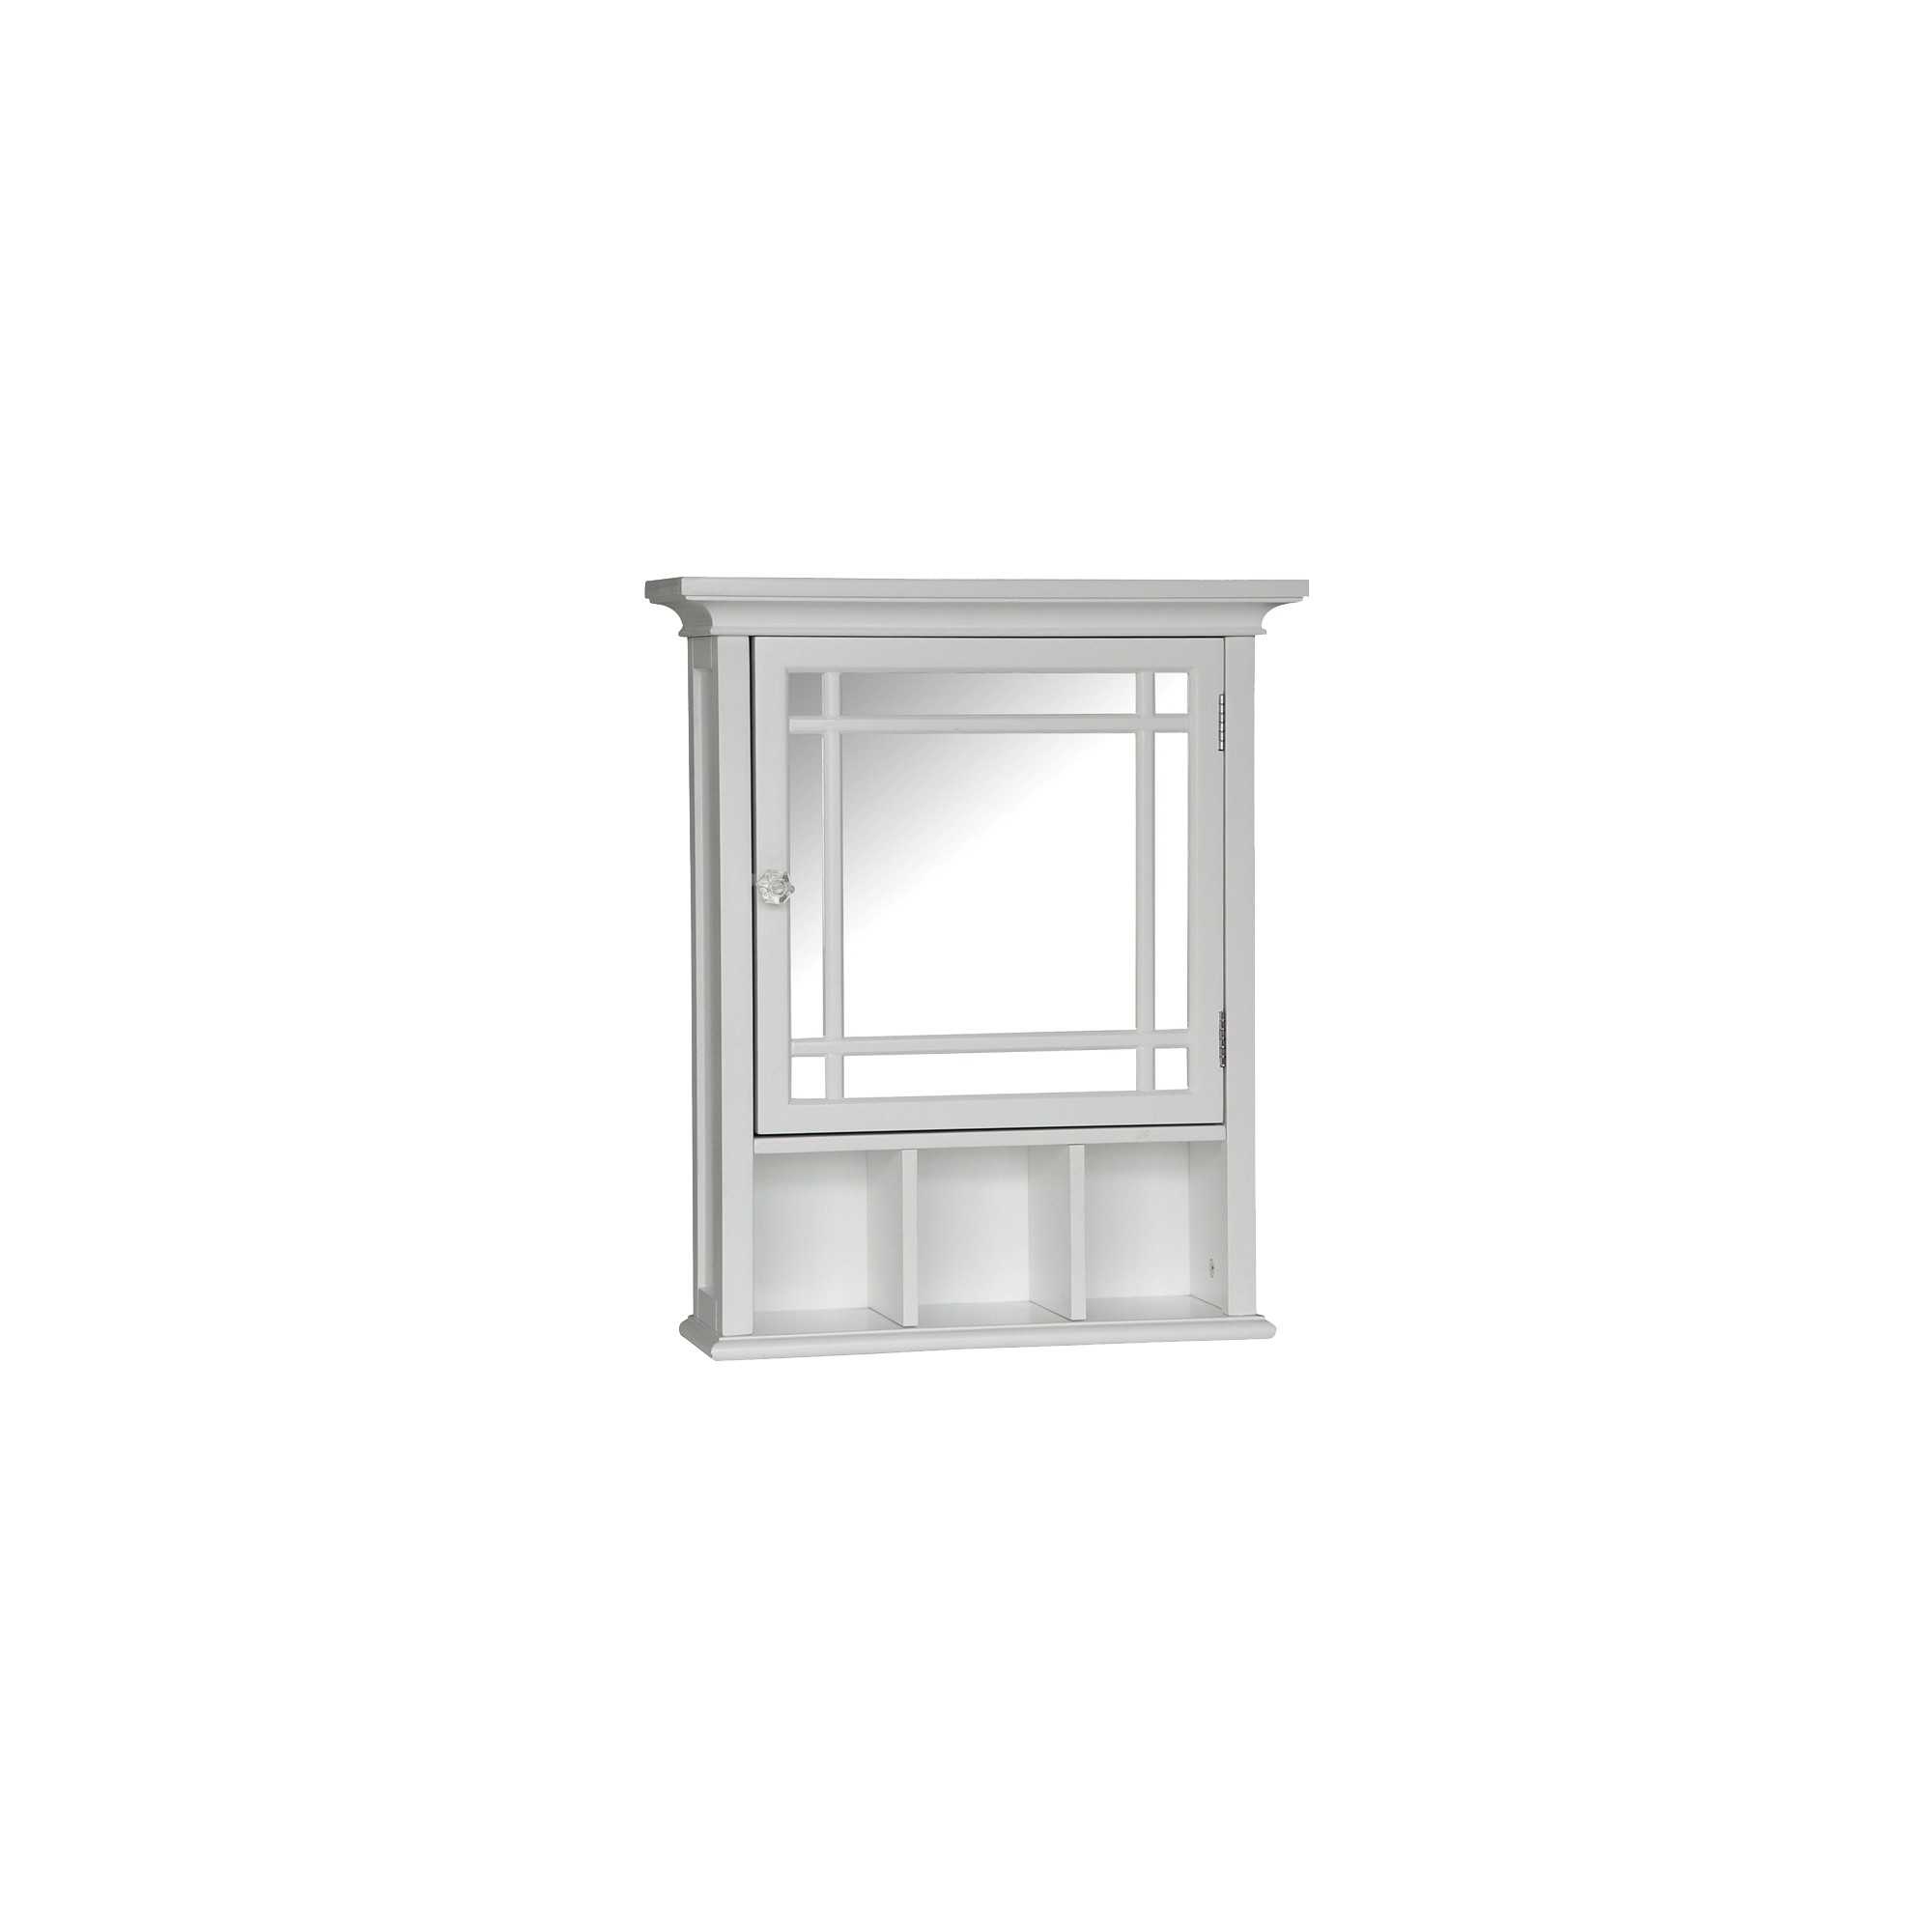 Neal Wall Cabinet with 1 Door White - Elegant Home Fashions